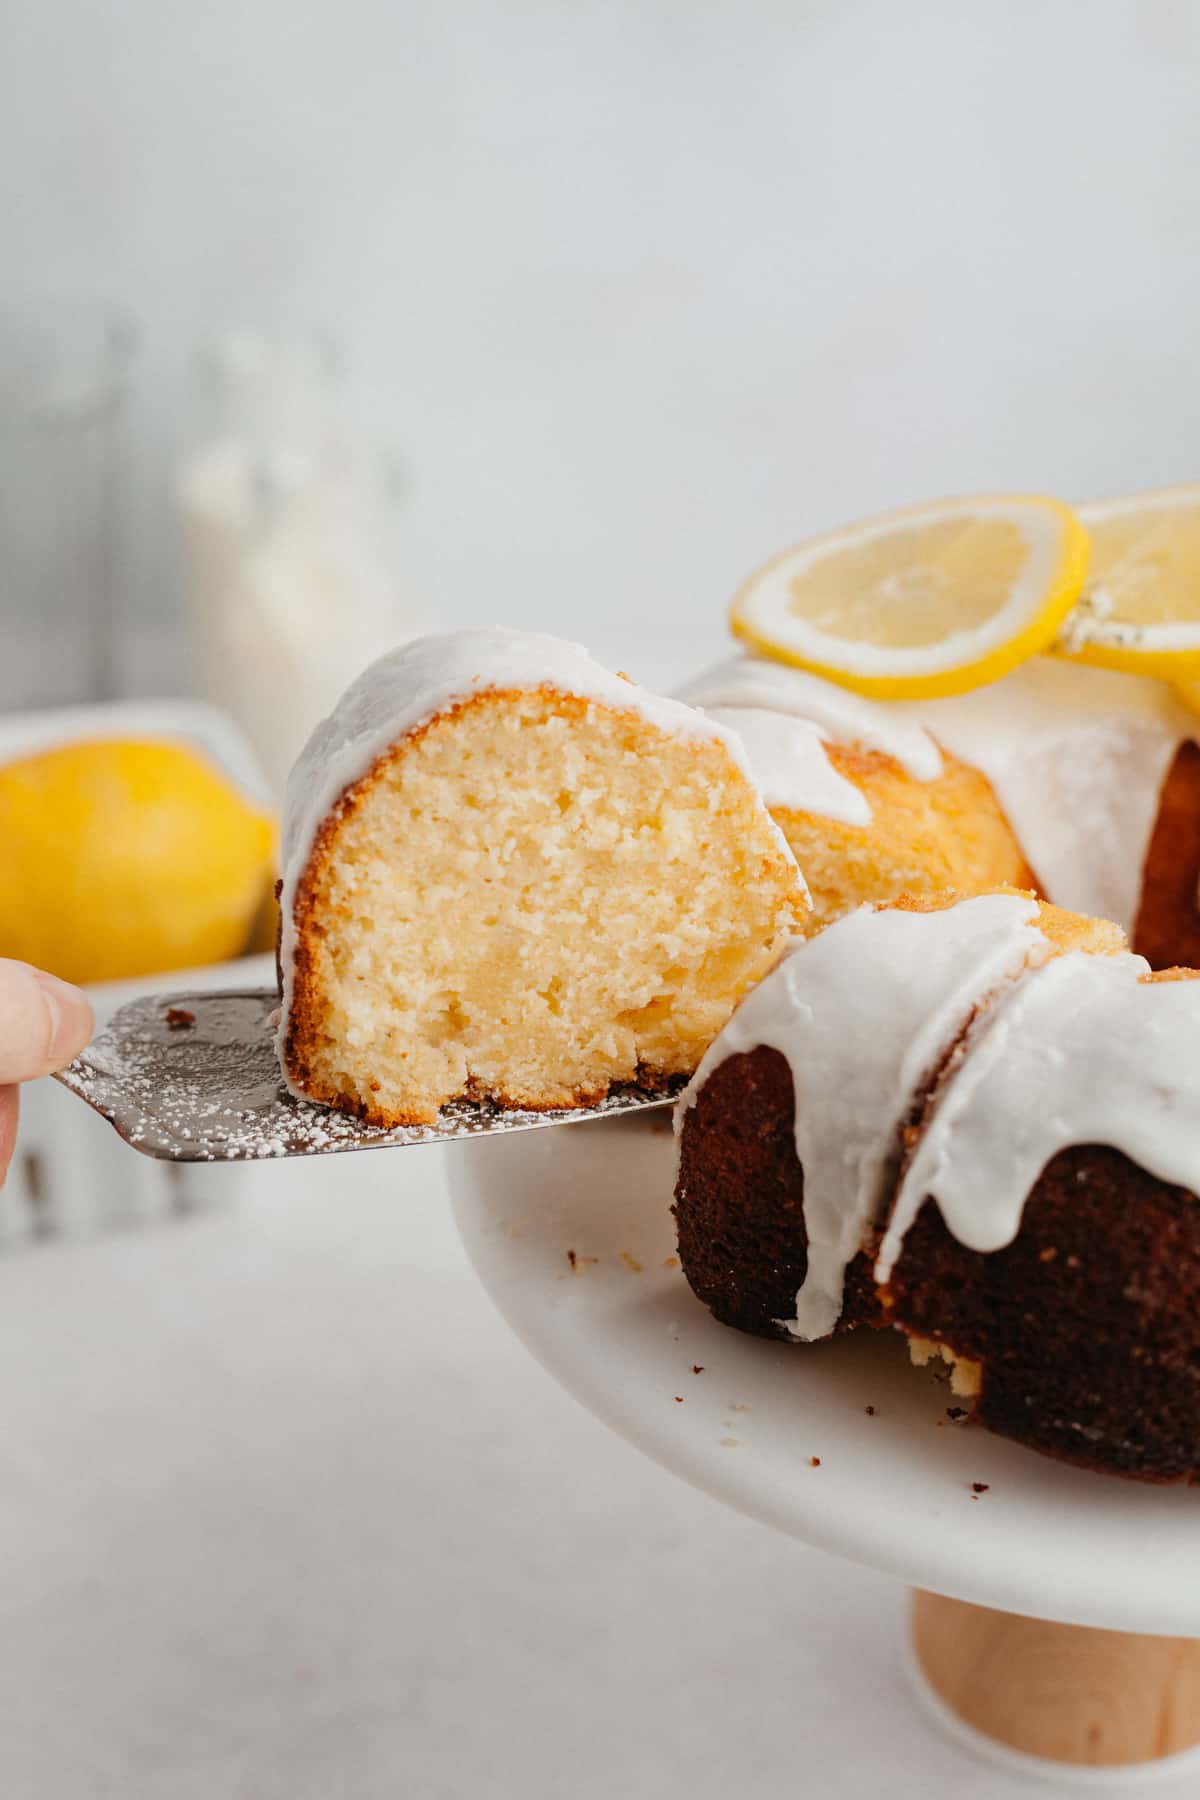 A slice of lemon bundt cake being lifted out with a silver cake server.